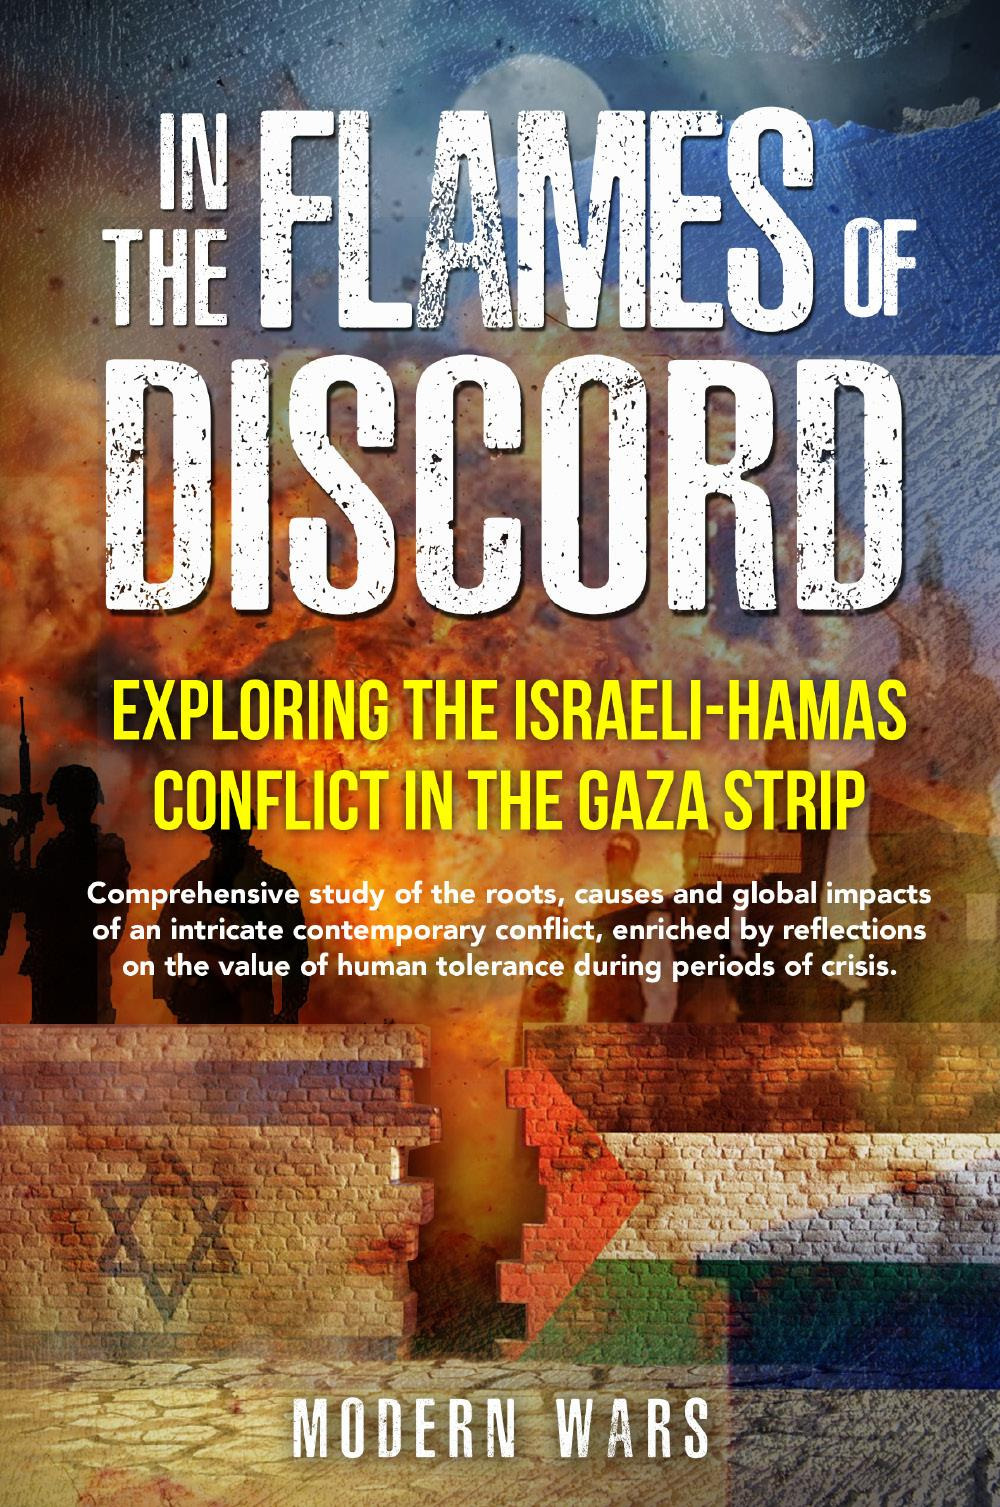 In the Flames of Discord: Exploring the Israeli-Hamas Conflict in the Gaza Strip. Comprehensive study of the roots, causes and global impacts of an intricate contemporary conflict, enriched by reflections on the value of human tolerance during periods of 